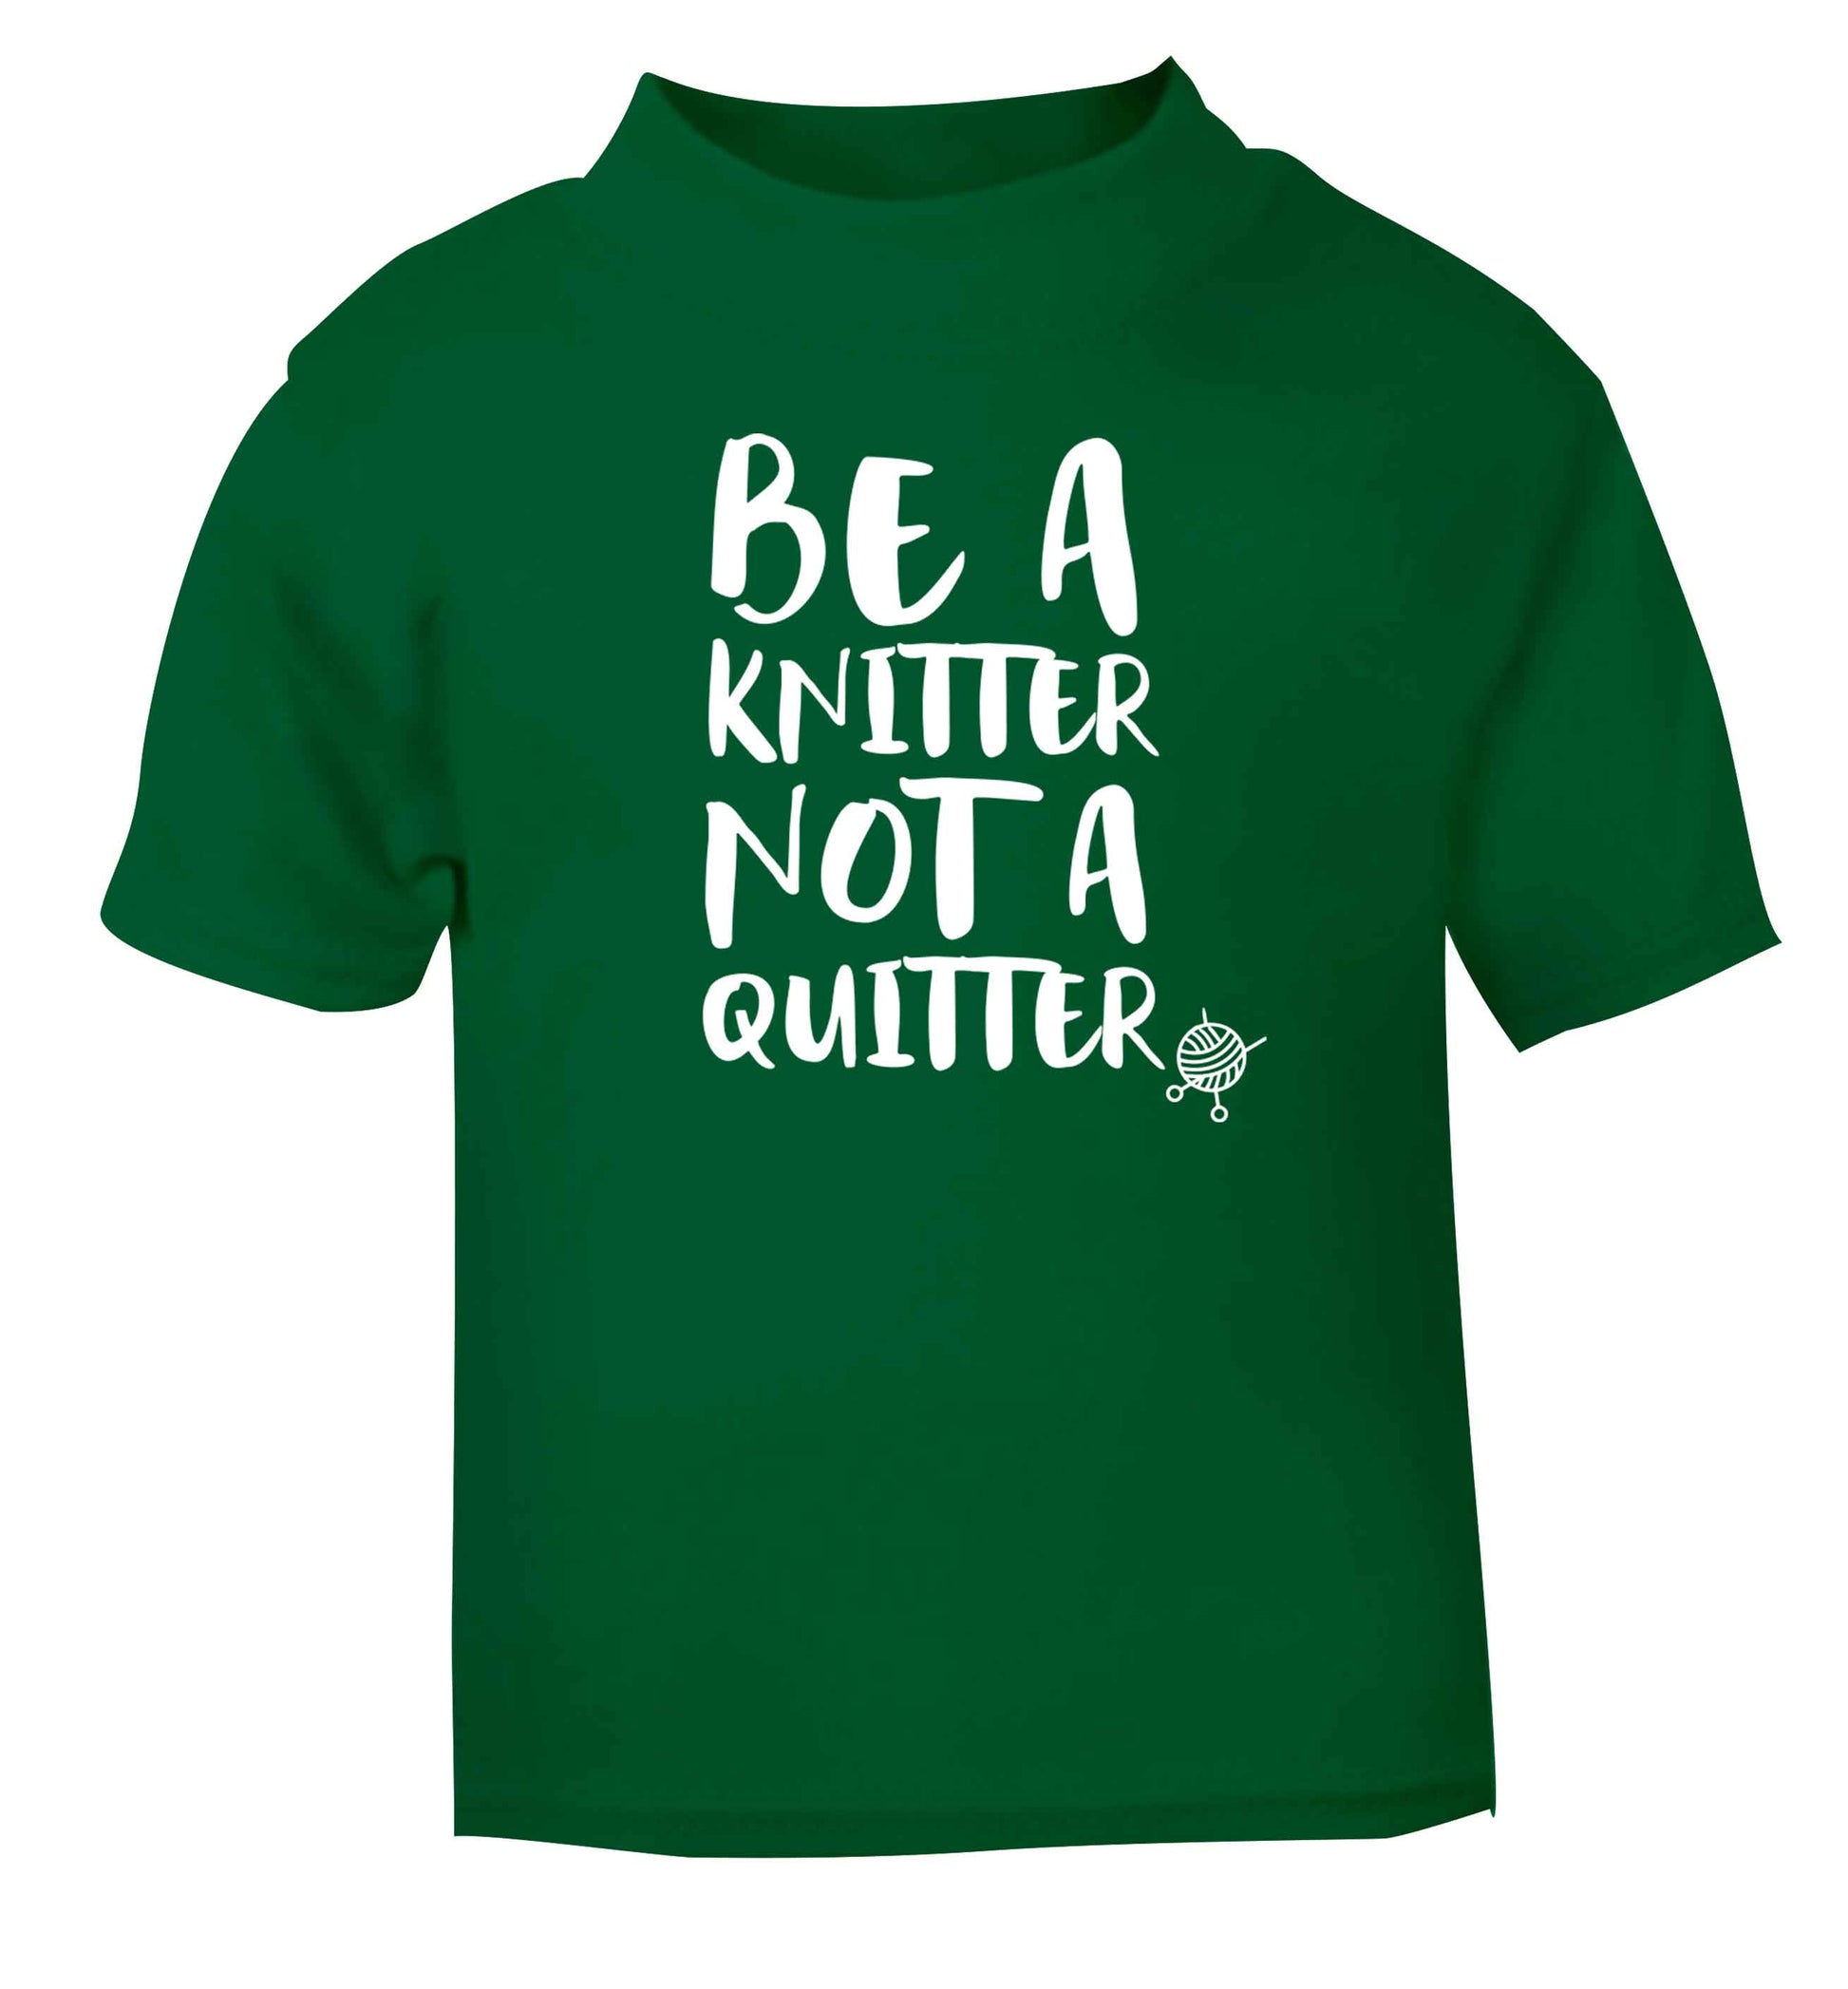 Be a knitter not a quitter green Baby Toddler Tshirt 2 Years